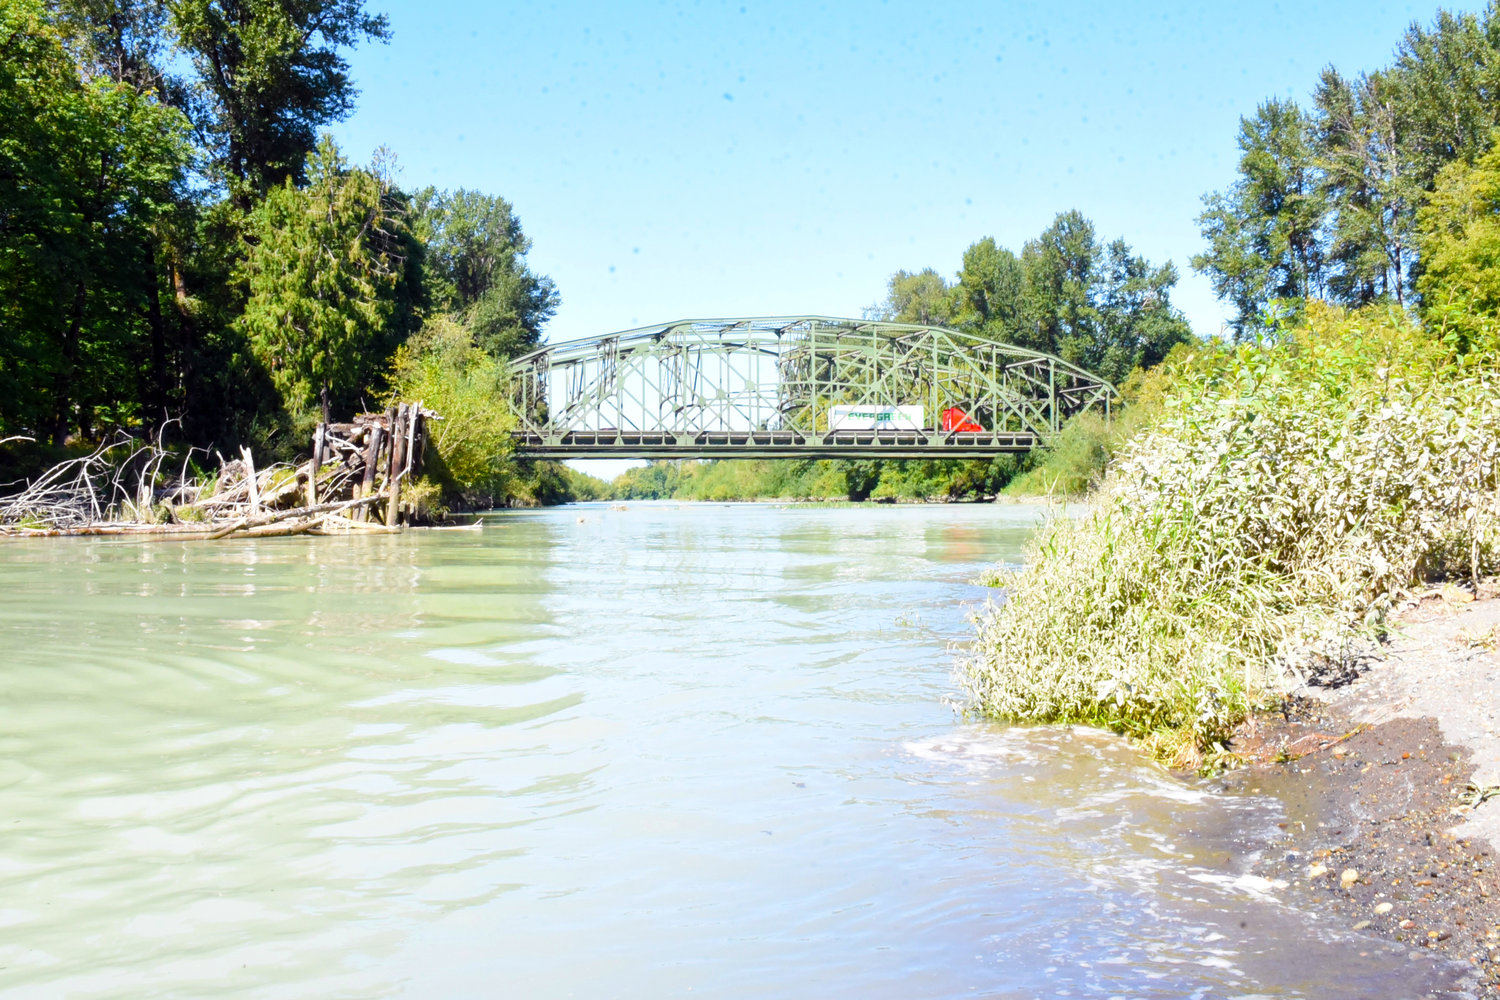 The Nisqually Indian Tribe plans to replace the Nisqually River Bridge to prevent the freeway from being washed out by the changing course of the Nisqually River.